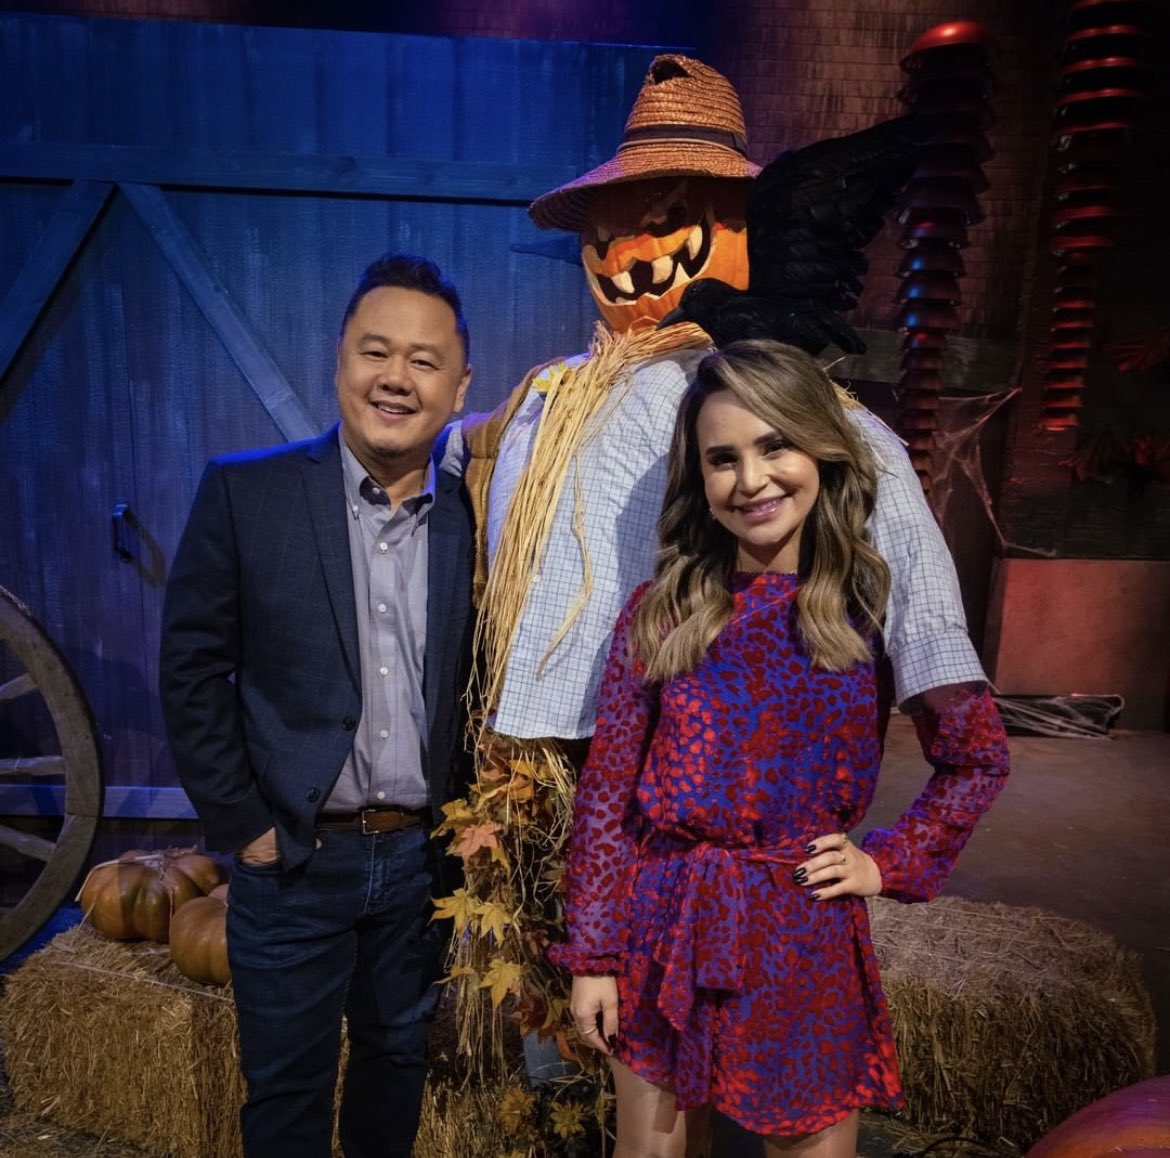 Had so much fun filming this episode with @jettila! Hope everyone enjoyed watching #HalloweenCookieChallenge on @FoodNetwork! 🎃🍪